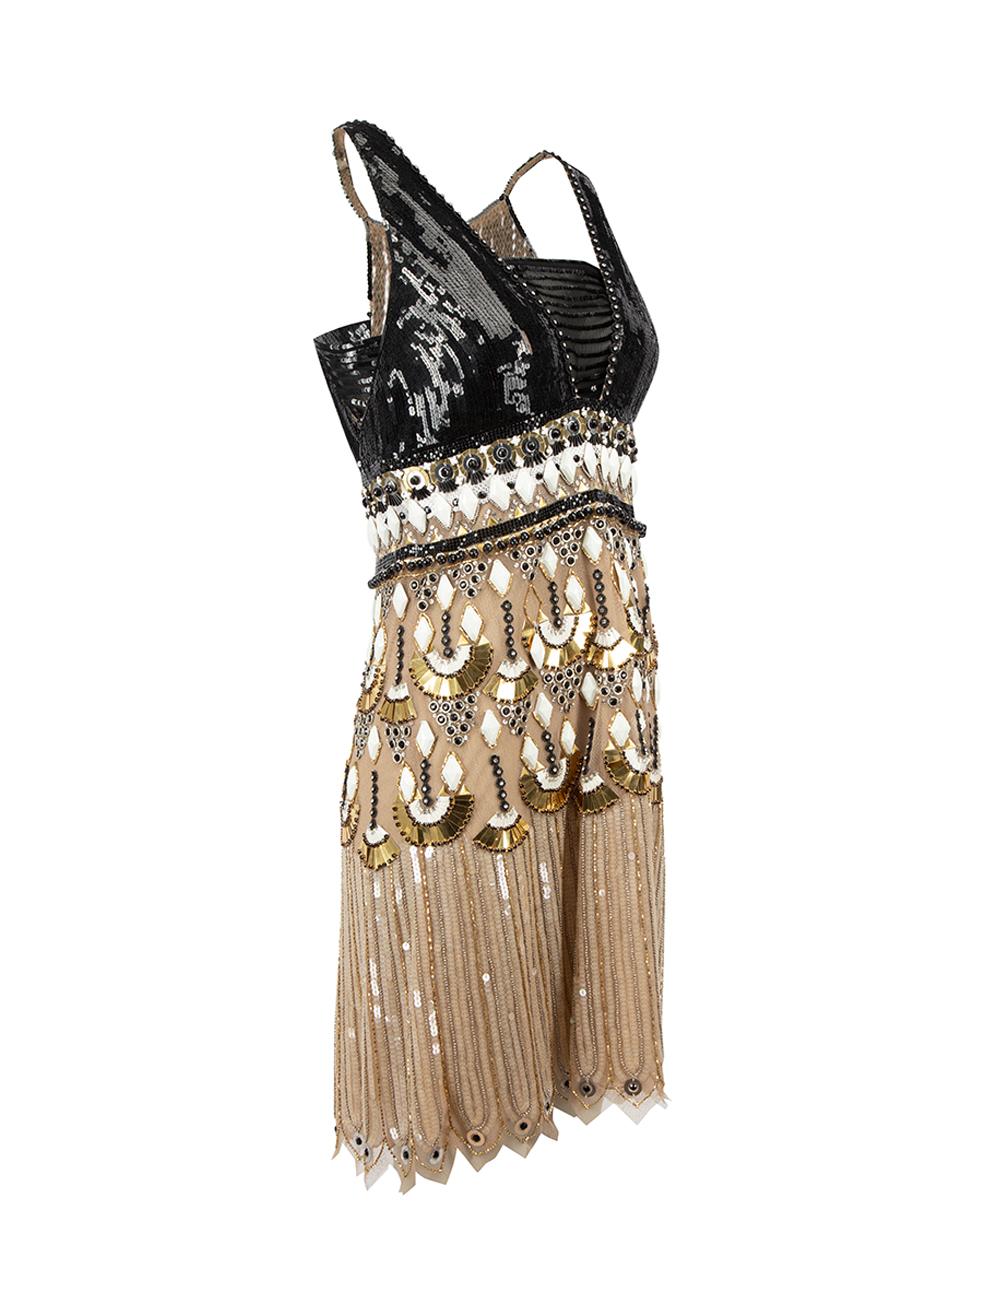 CONDITION is Good. General wear to dress is evident. Moderate signs of wear to embellishment with loose beads, embellishments, thread ends and sequins throughout on this used Jenny Packham designer resale item.



Details


Beige, black, white and